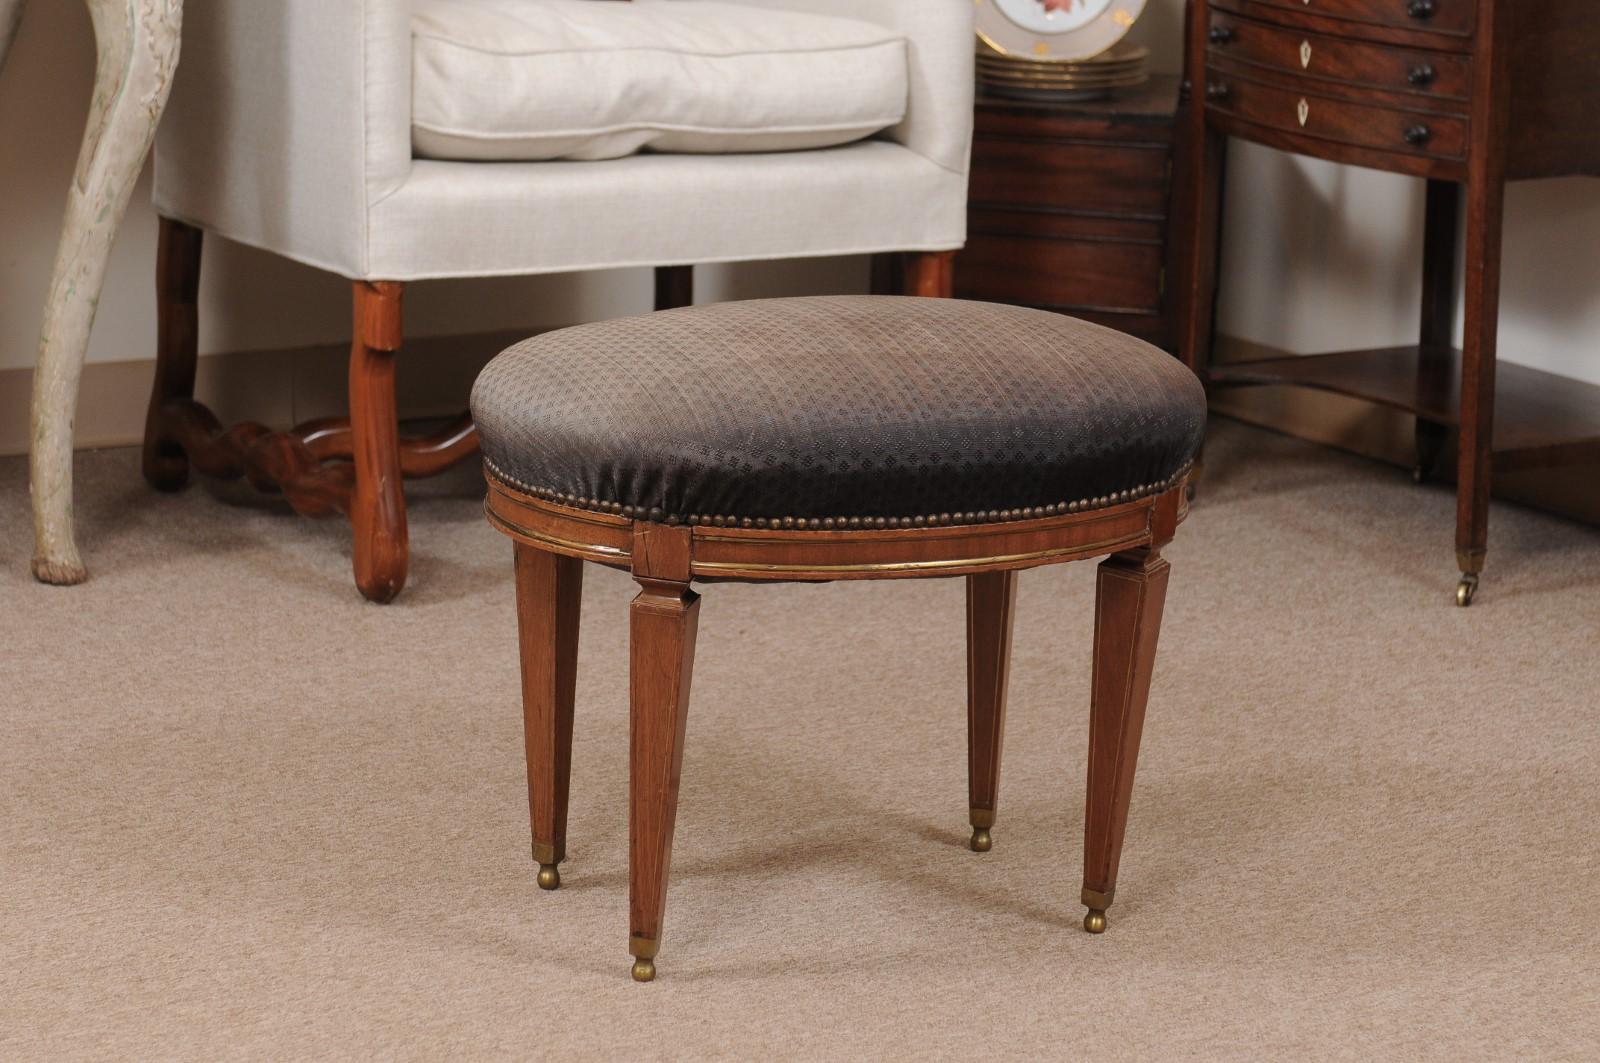 Neoclassical Style Walnut Stool with Brass Inlay & Oval Upholstered Seat, Early 20th Century